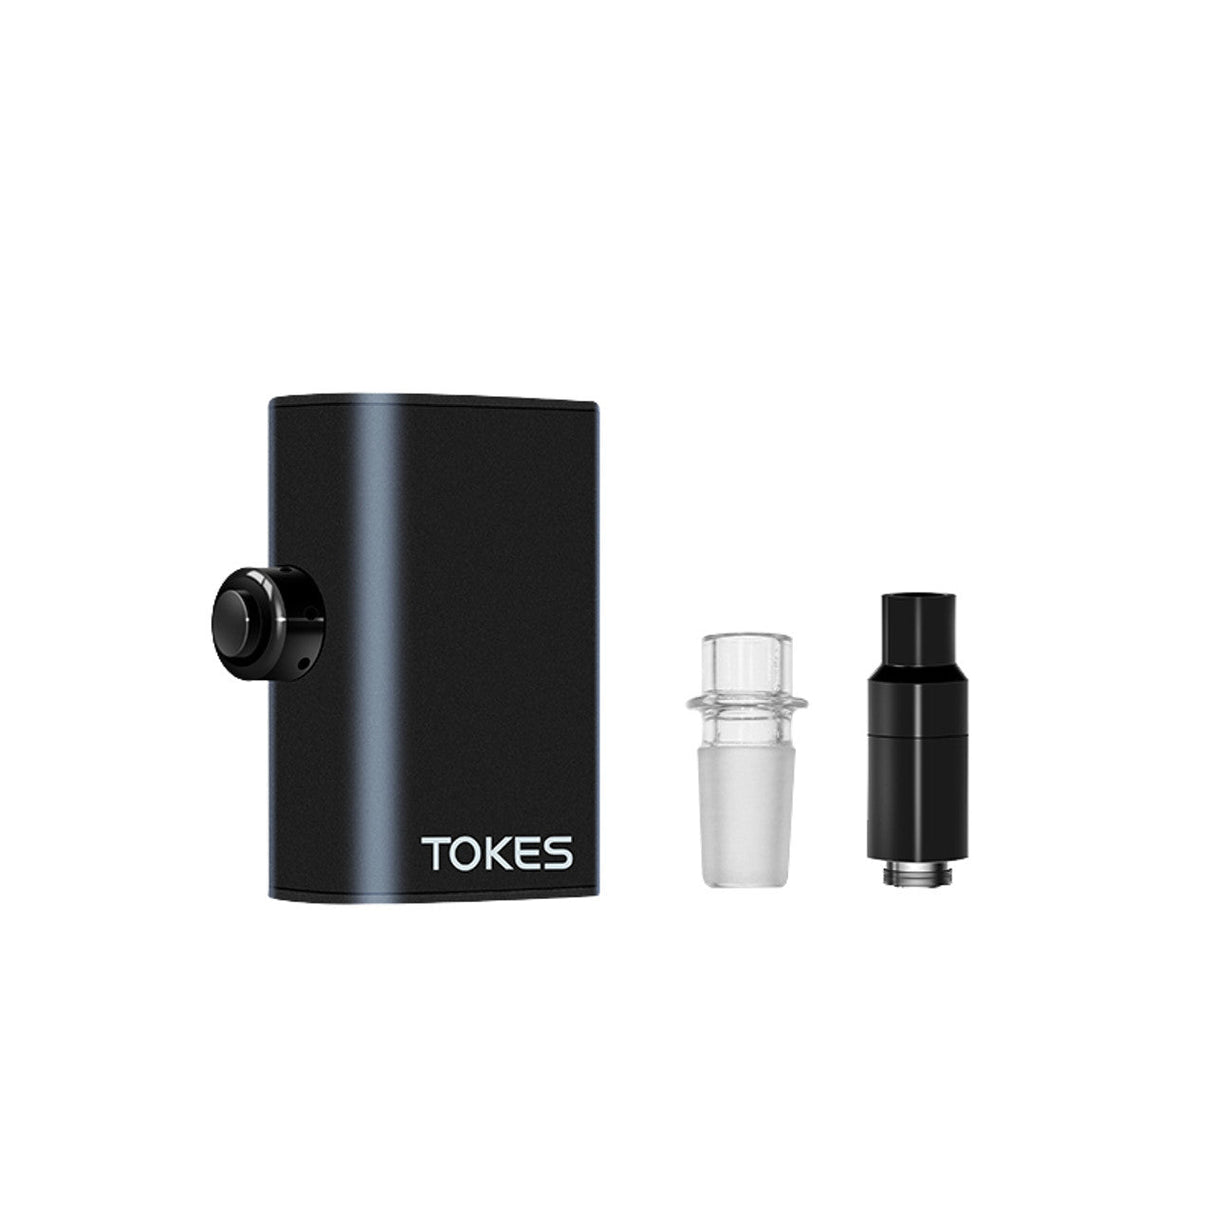 SOC Tokes Dual-Use Wax Vaporizer with 14mm Male Adapter and 650mAh Battery - Black